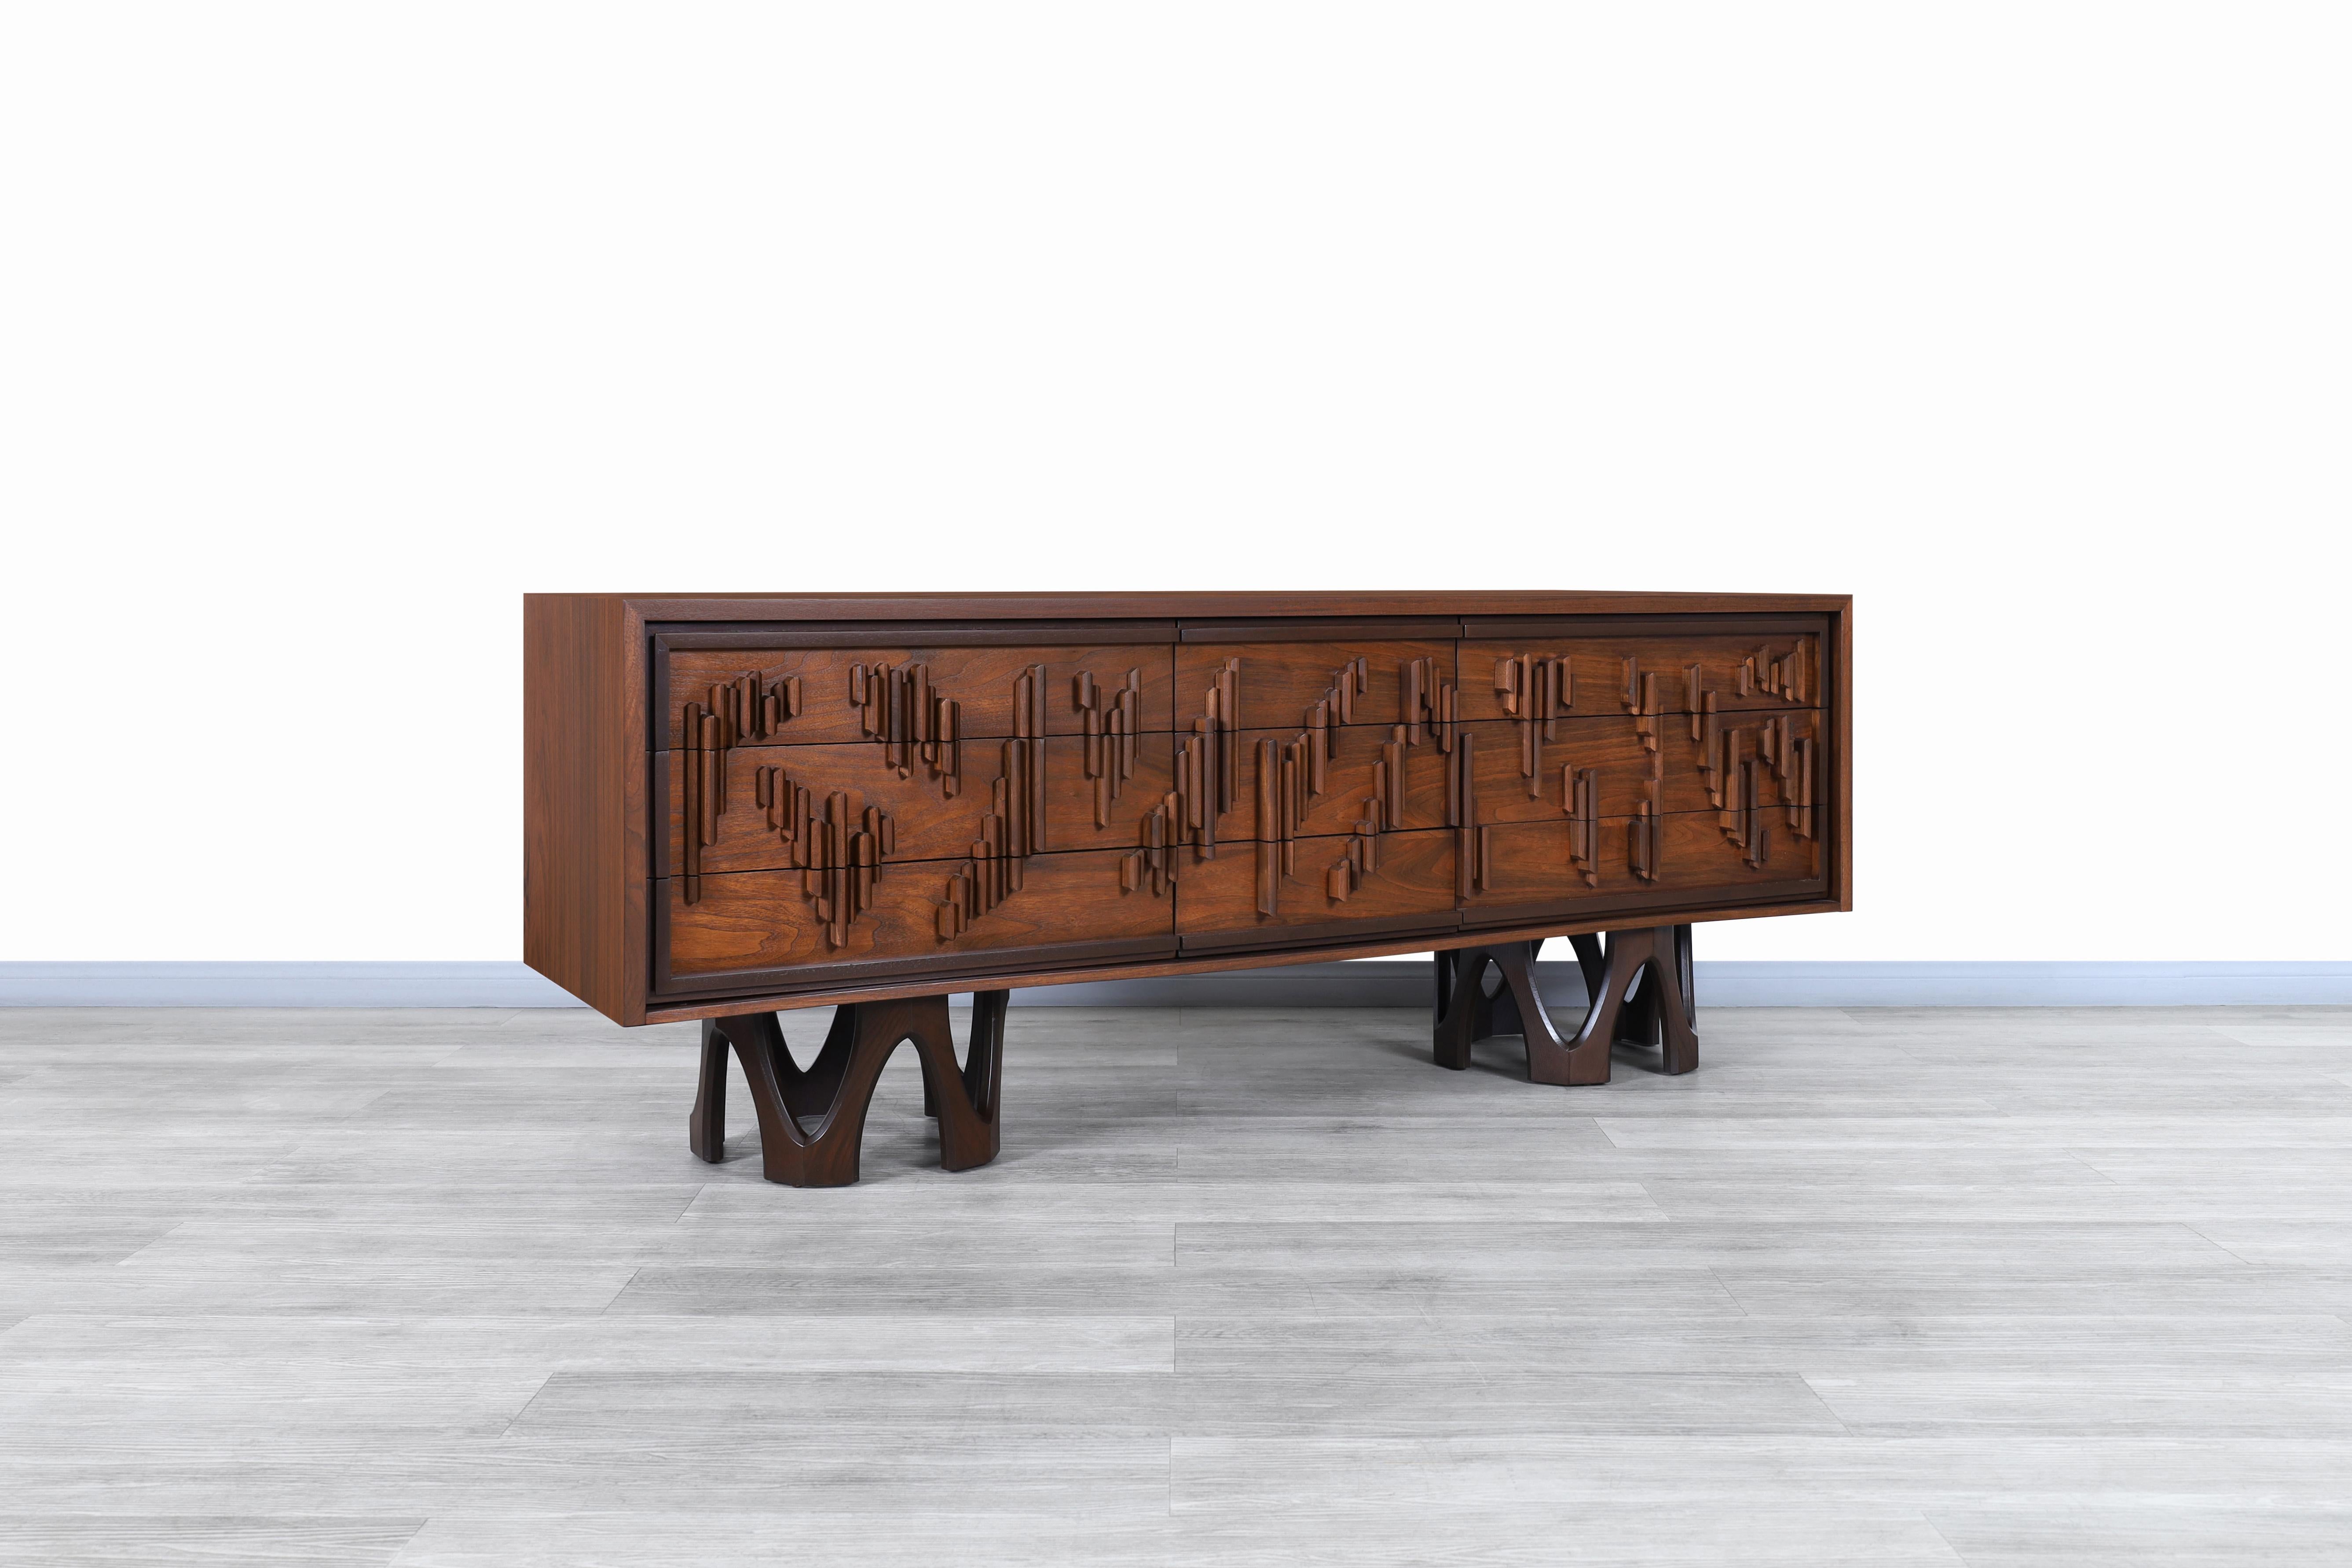 Stunning vintage Brutalist walnut credenza / dresser manufactured in Canada and custom made for Berman Bros., circa 1960s. This credenza has an avant-garde design where the quality of the walnut wood and the contrast of colors expressed throughout